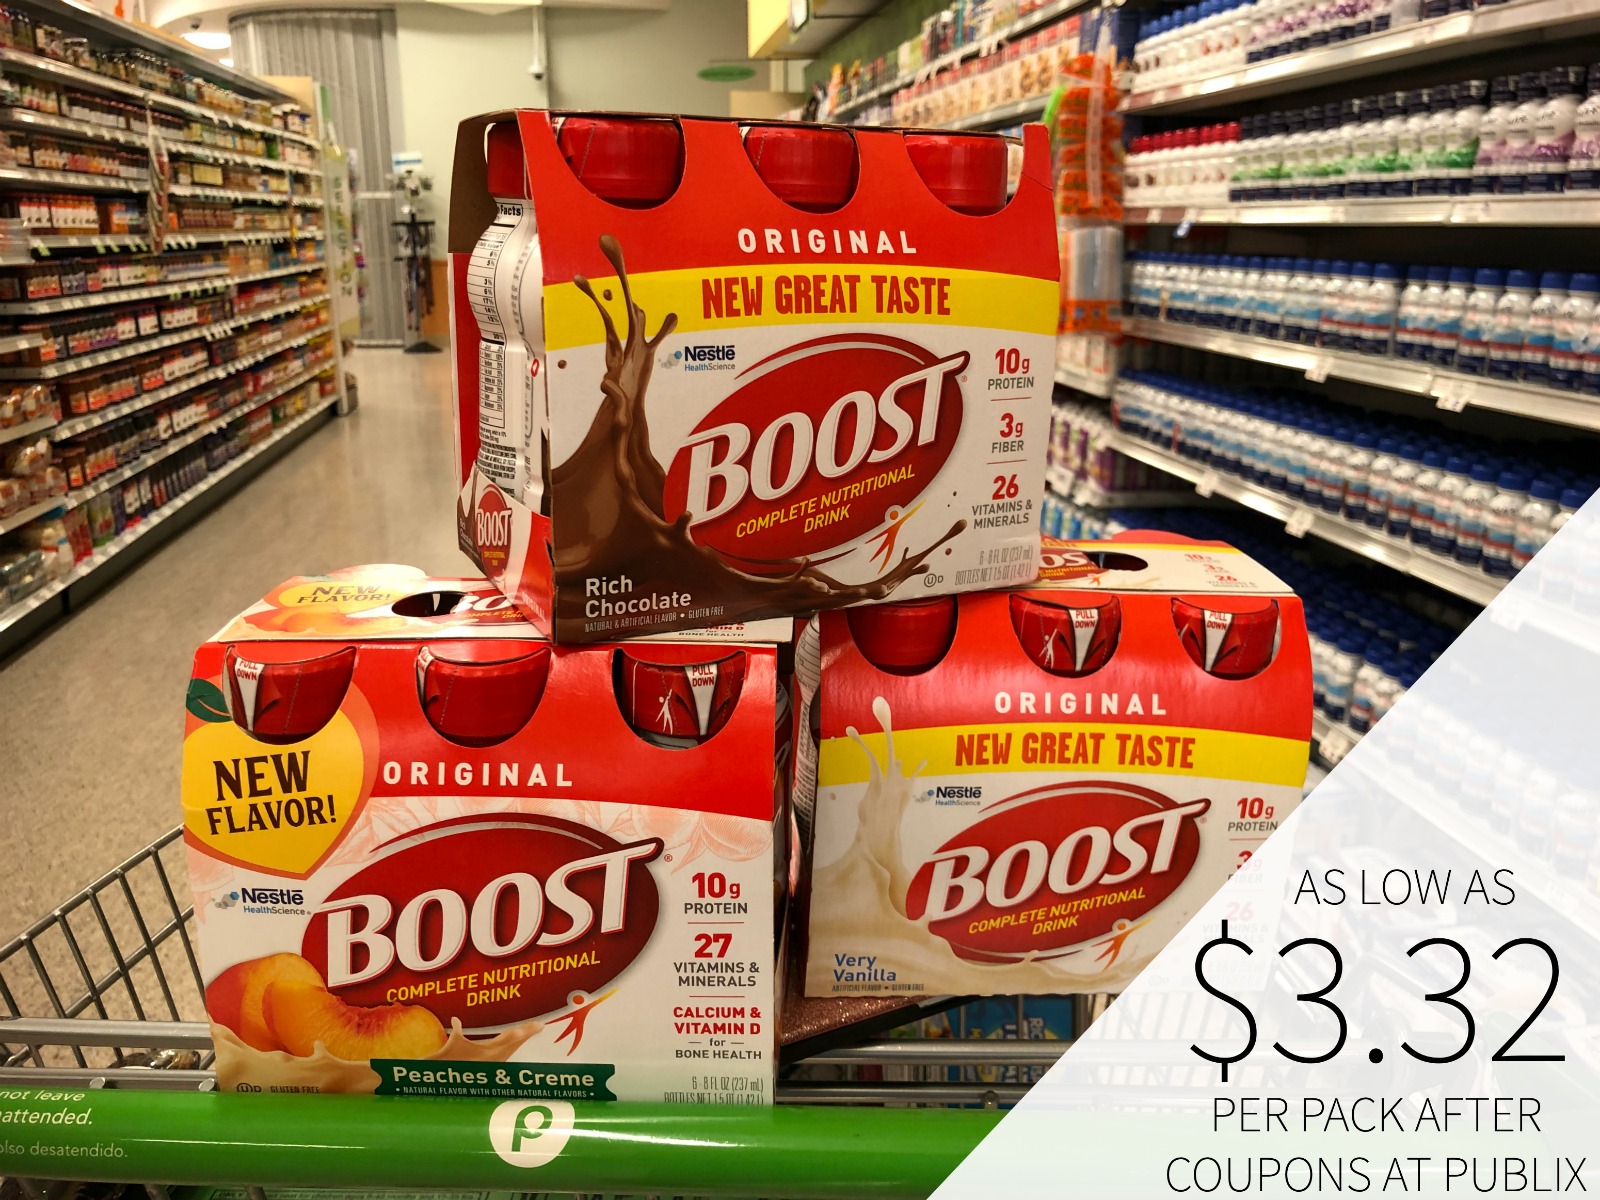 Fantastic Deal On BOOST® Nutritional Drinks This Week At Publix – Stock Up & Save!